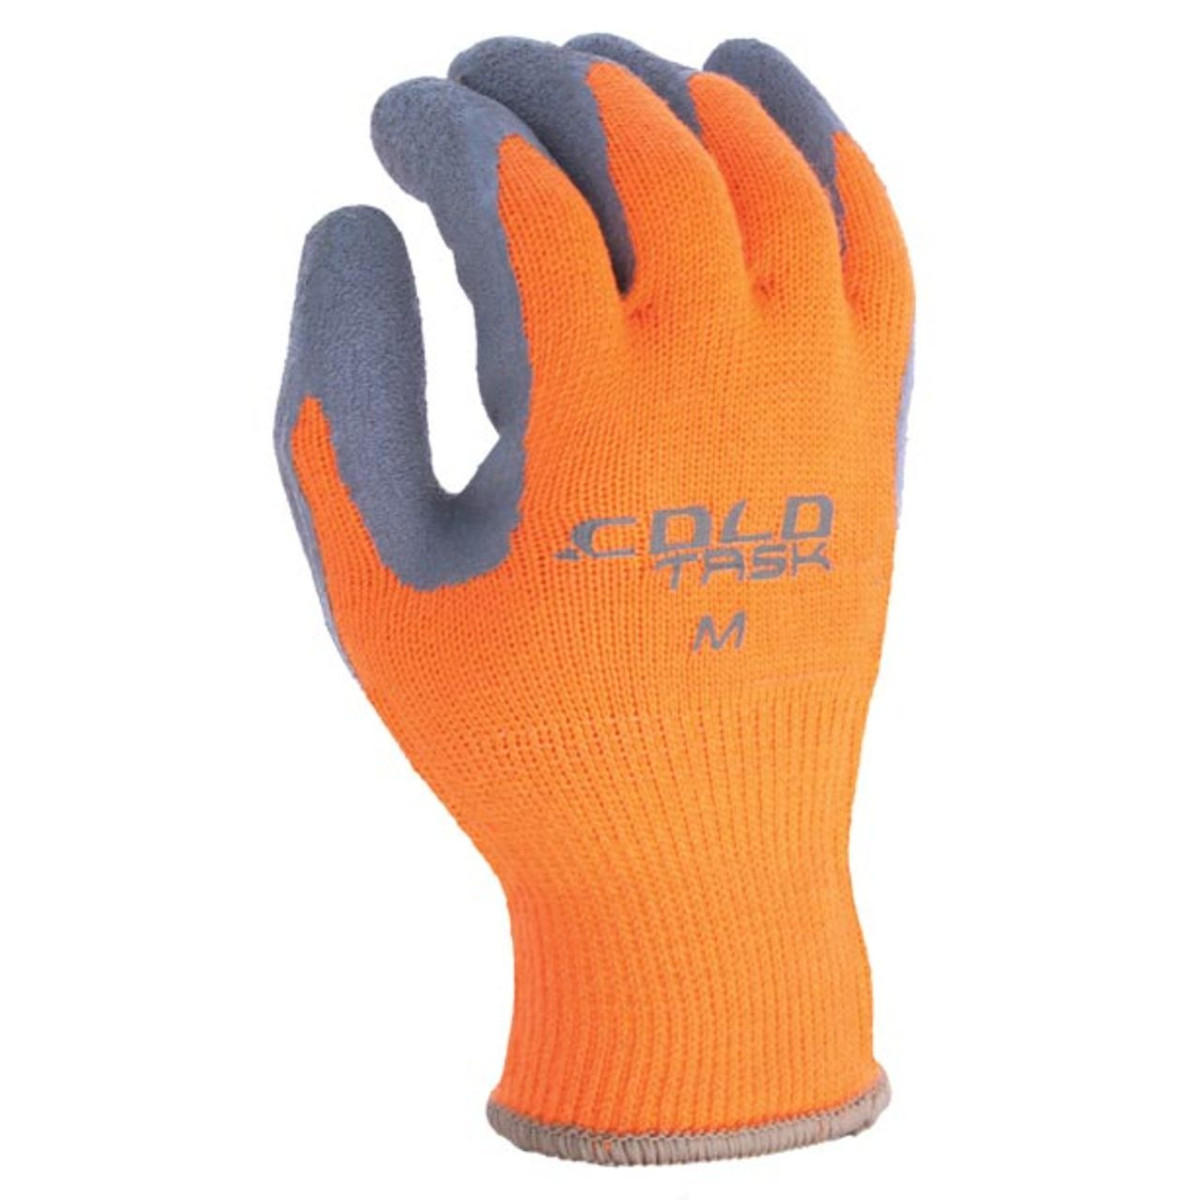 [10 PACK] Latex Dipped Nitrile Coated Work Gloves Small - String Knit  Cotton Coated Work Safety Gloves Great for Construction, Warehouse, Home